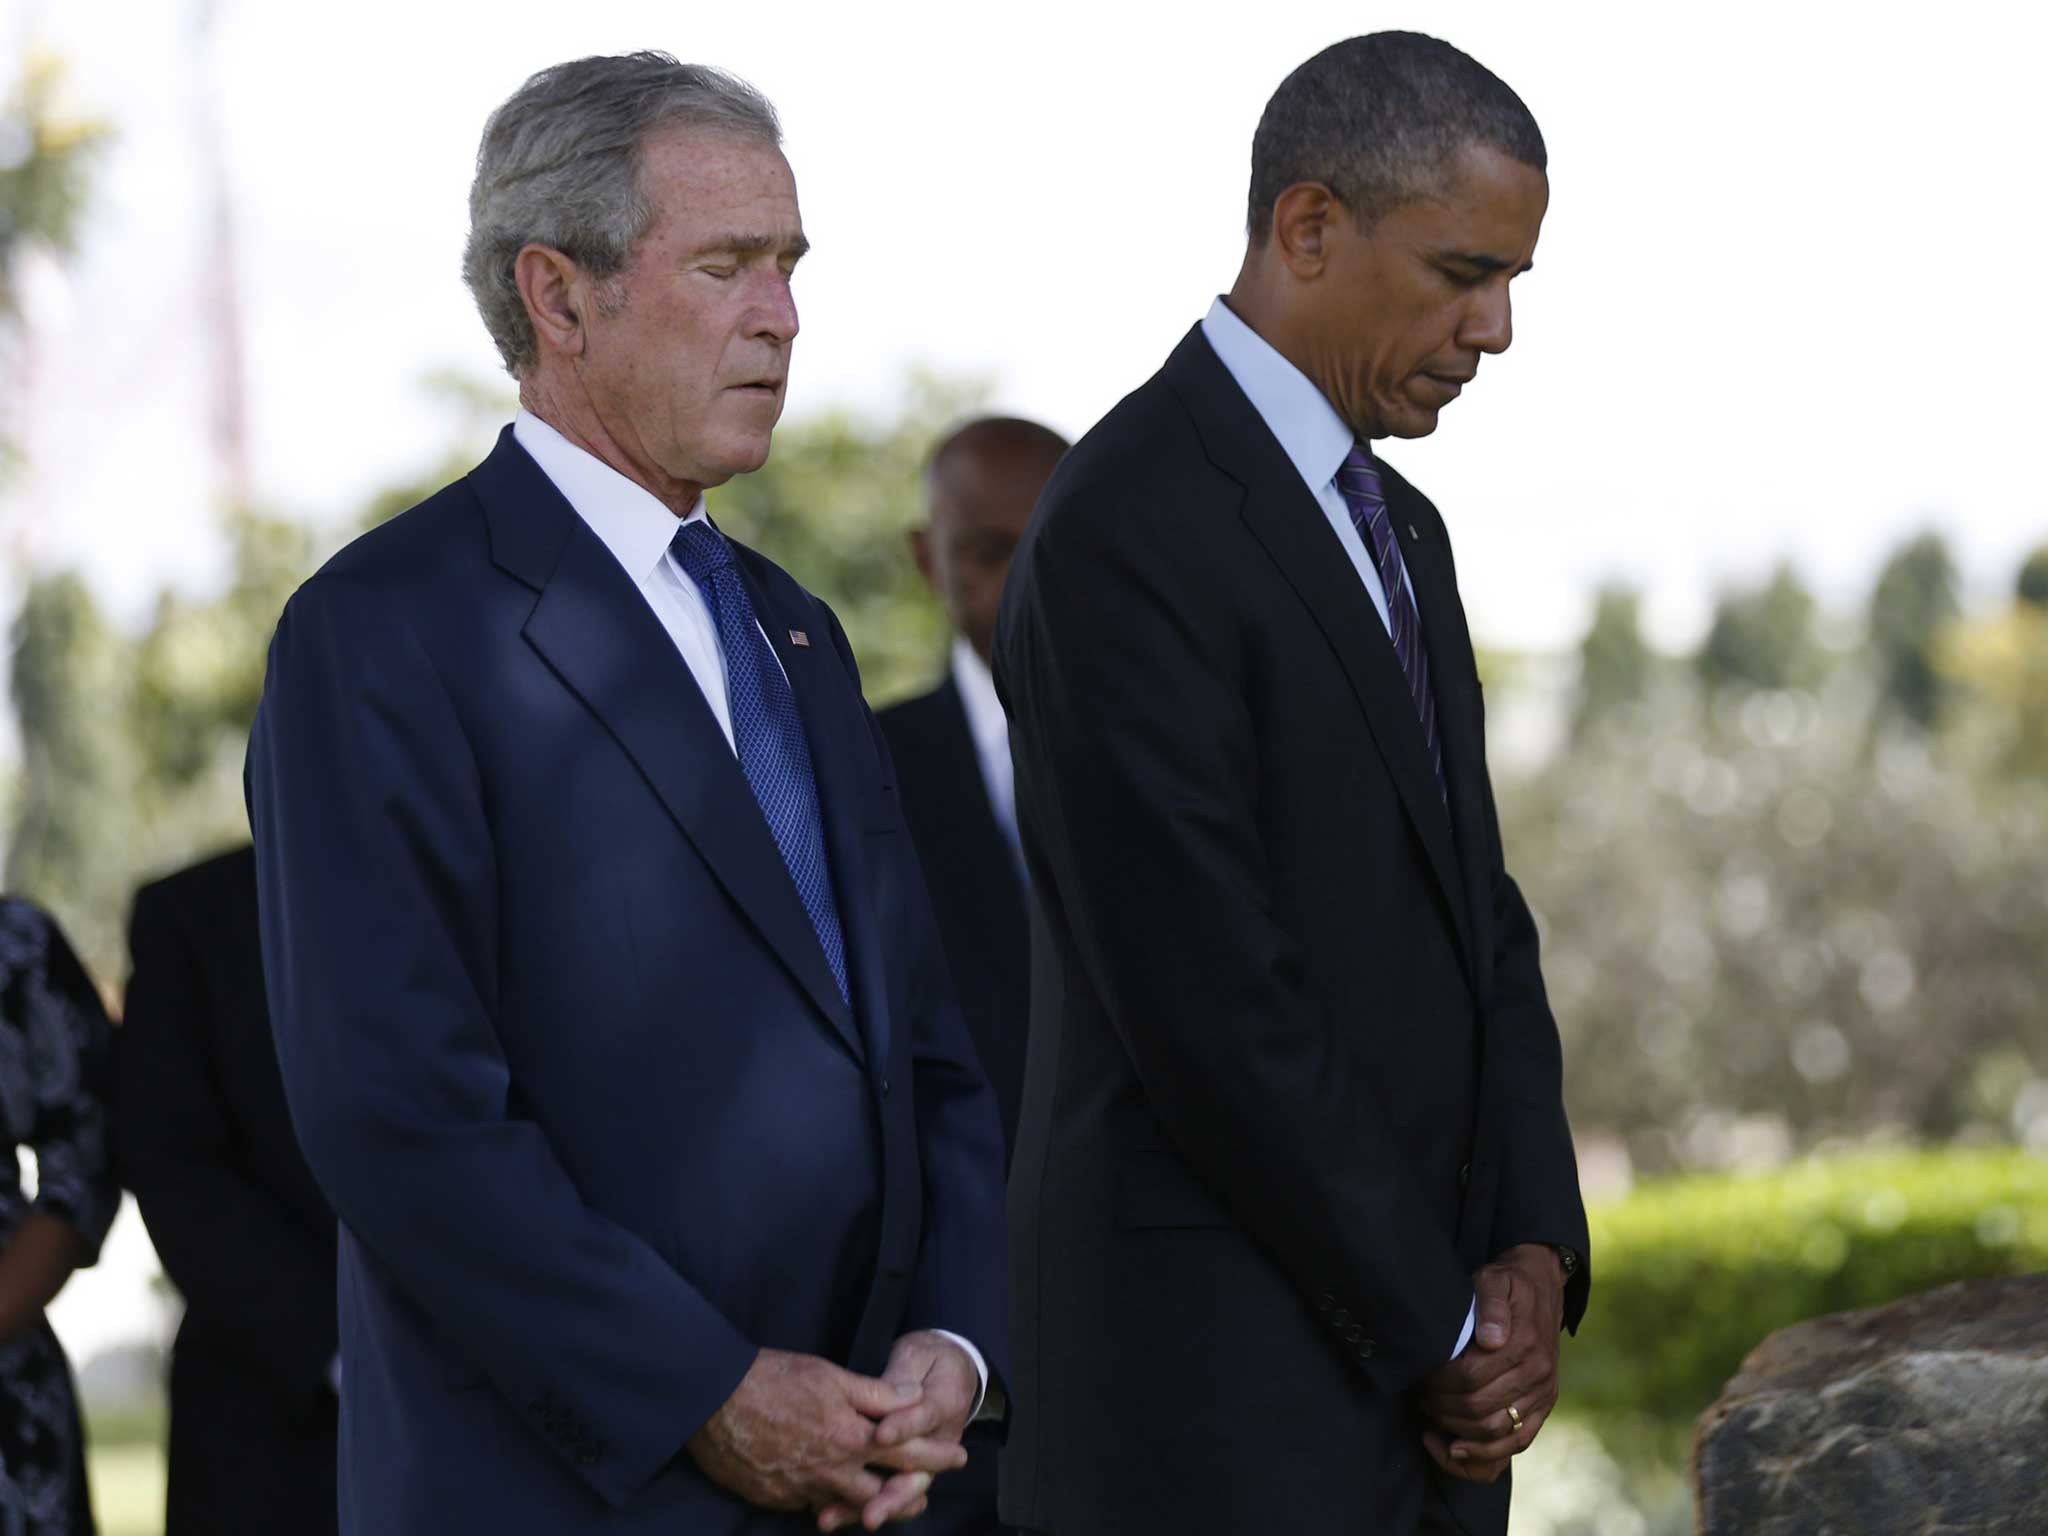 Barack Obama and George W Bush attend a memorial for the victims of the 1998 US Embassy bombing in Dar es Salaam